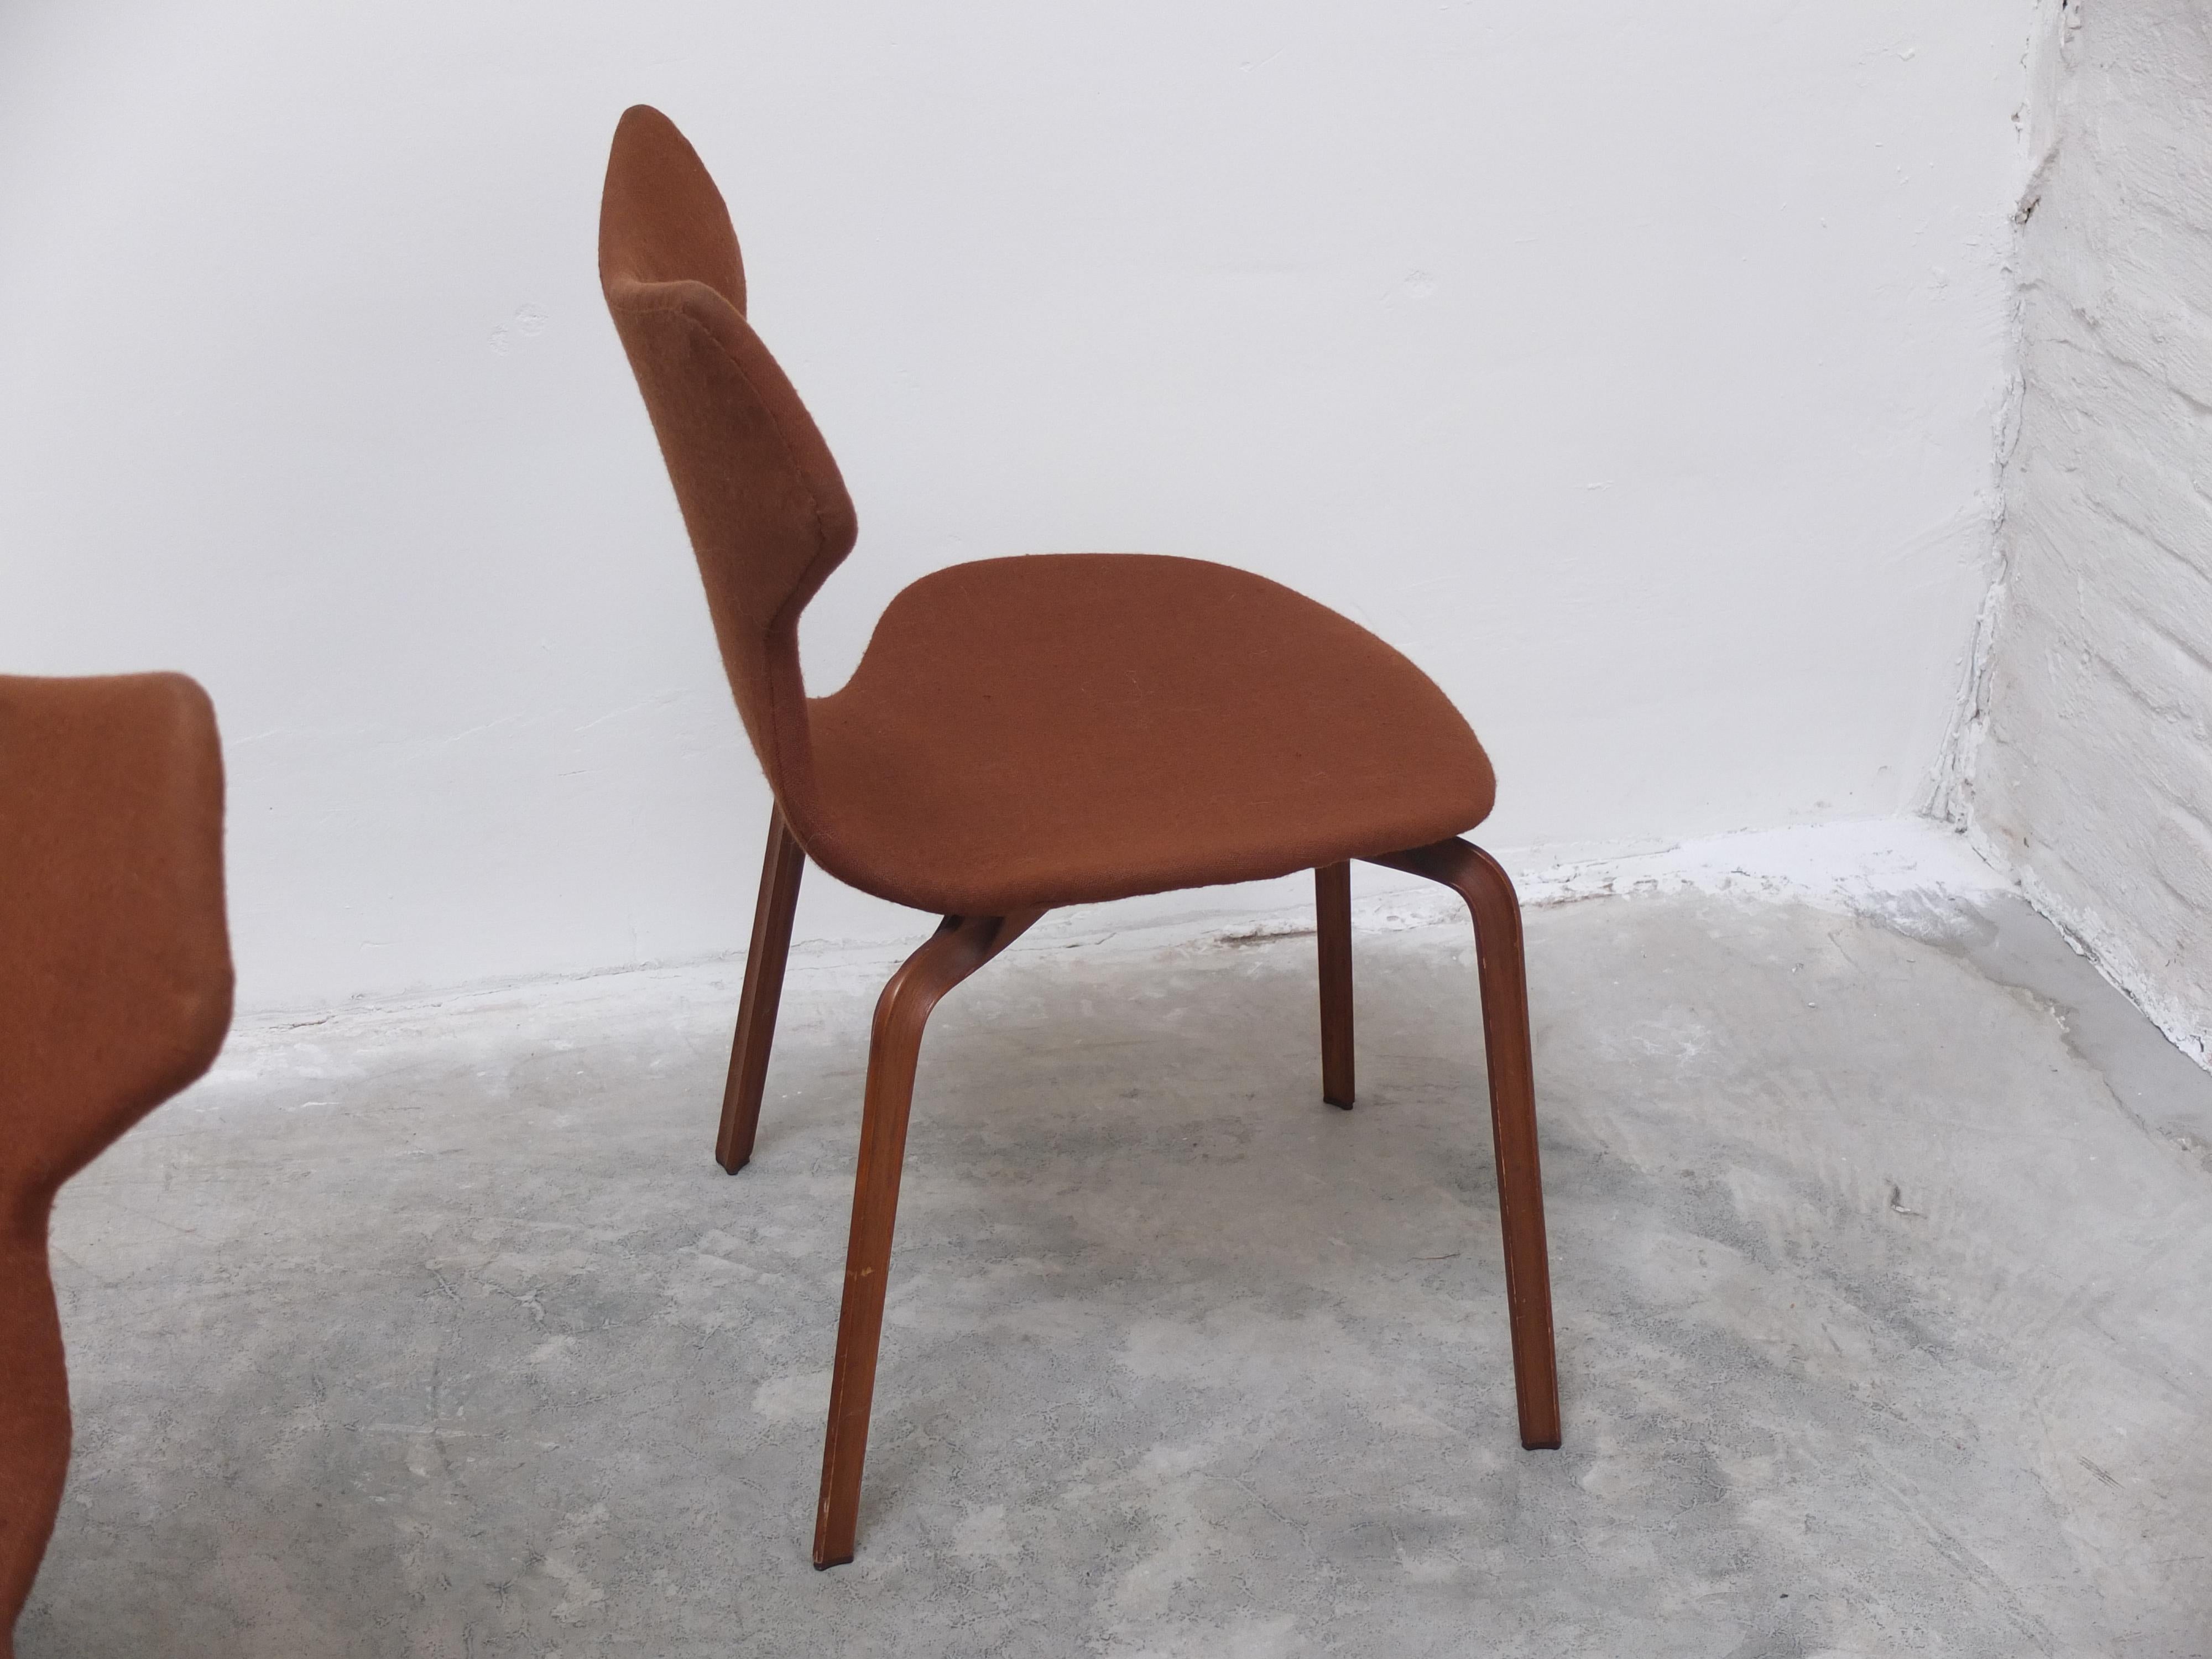 Set of 4 1st Edition 'Grand Prix' Chairs by Arne Jacobsen for Fritz Hansen, 1957 For Sale 10